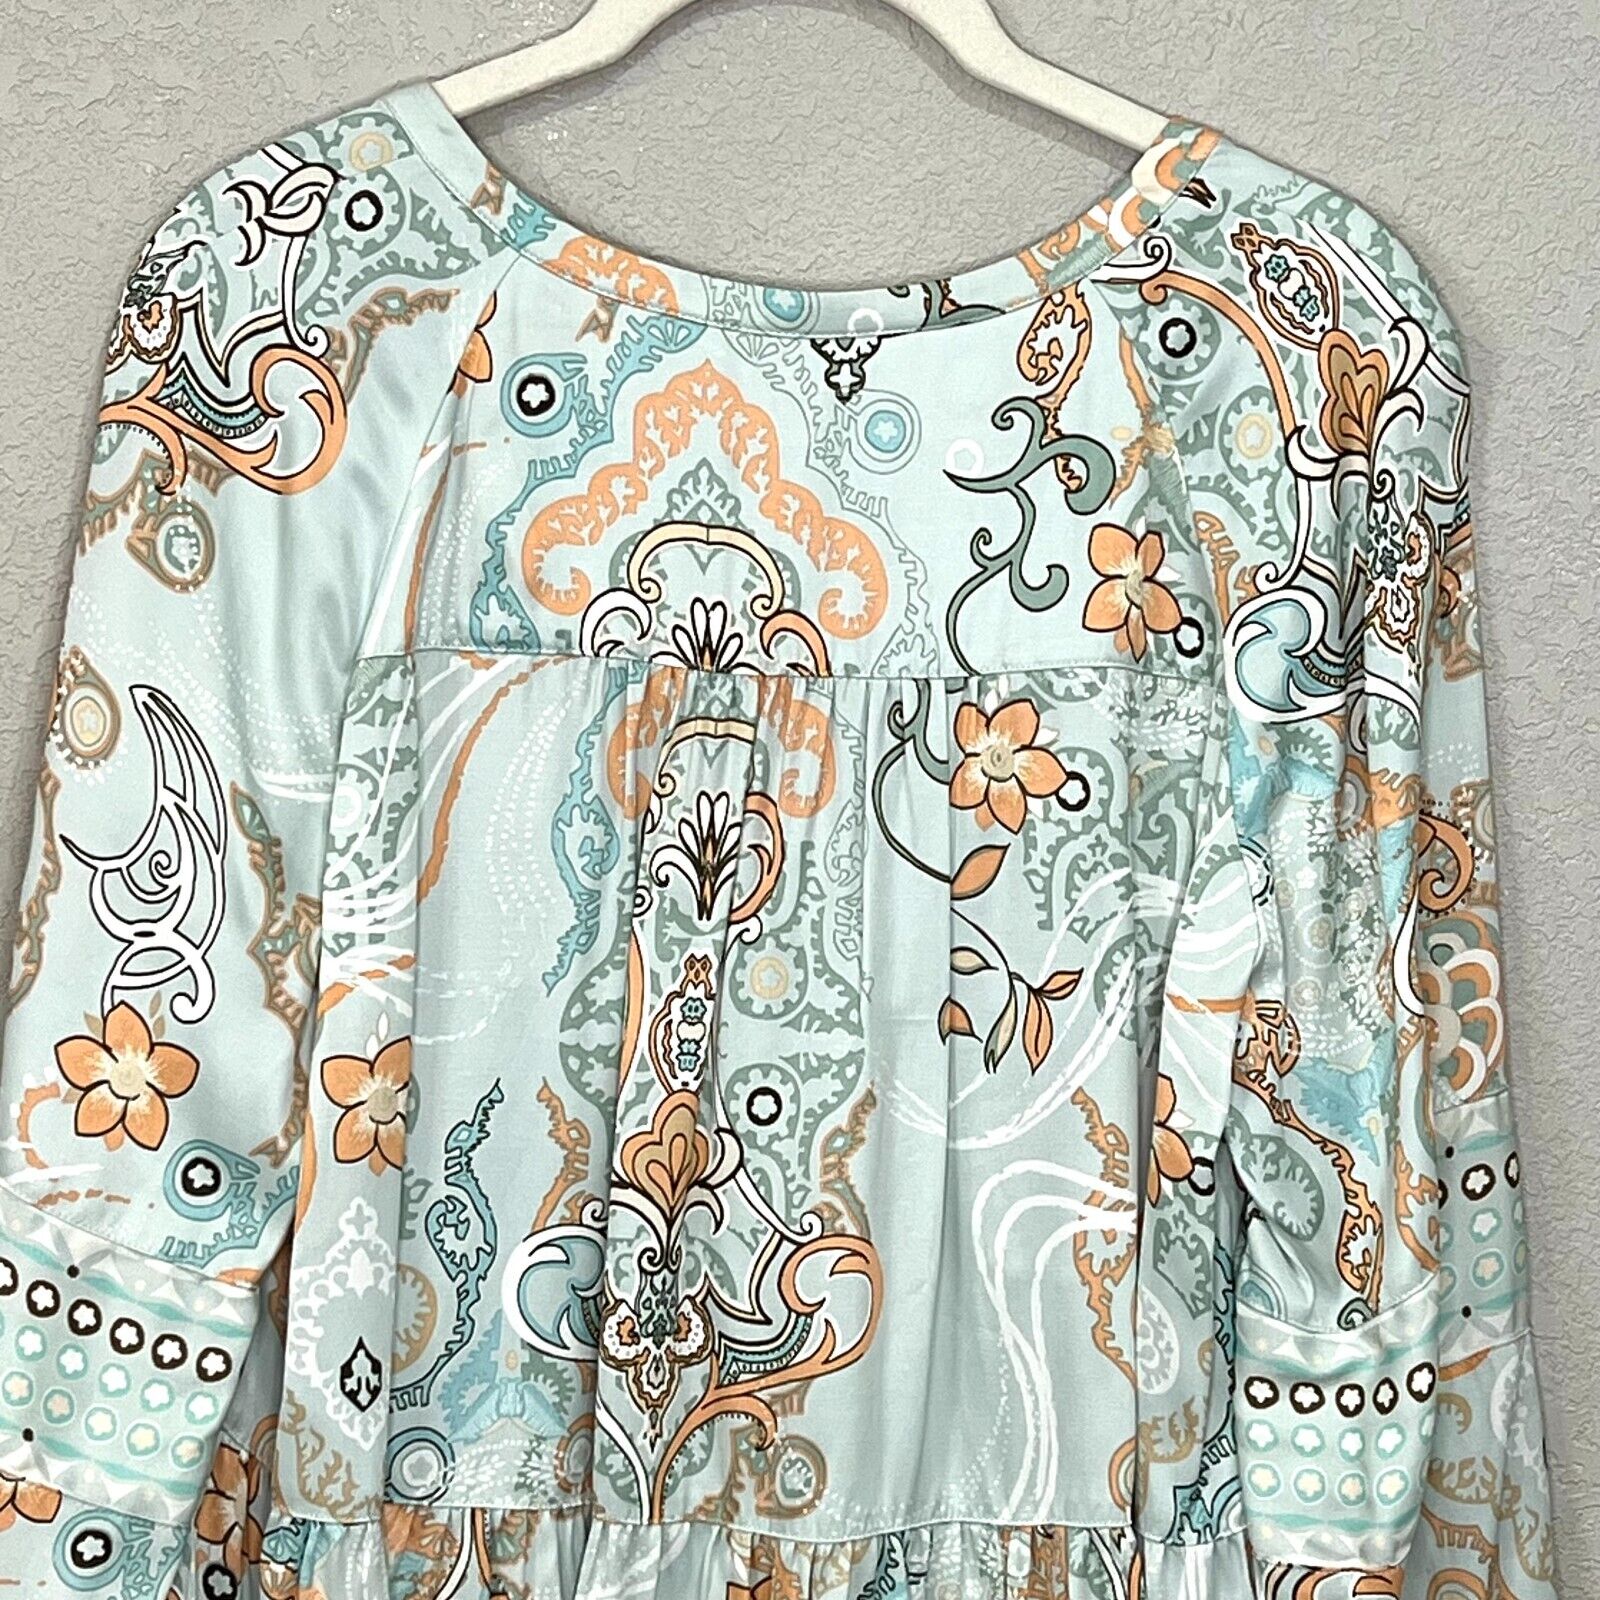 Odd Molly Mint Green Peach Floral Paisley Top Blouse Size Small (1)